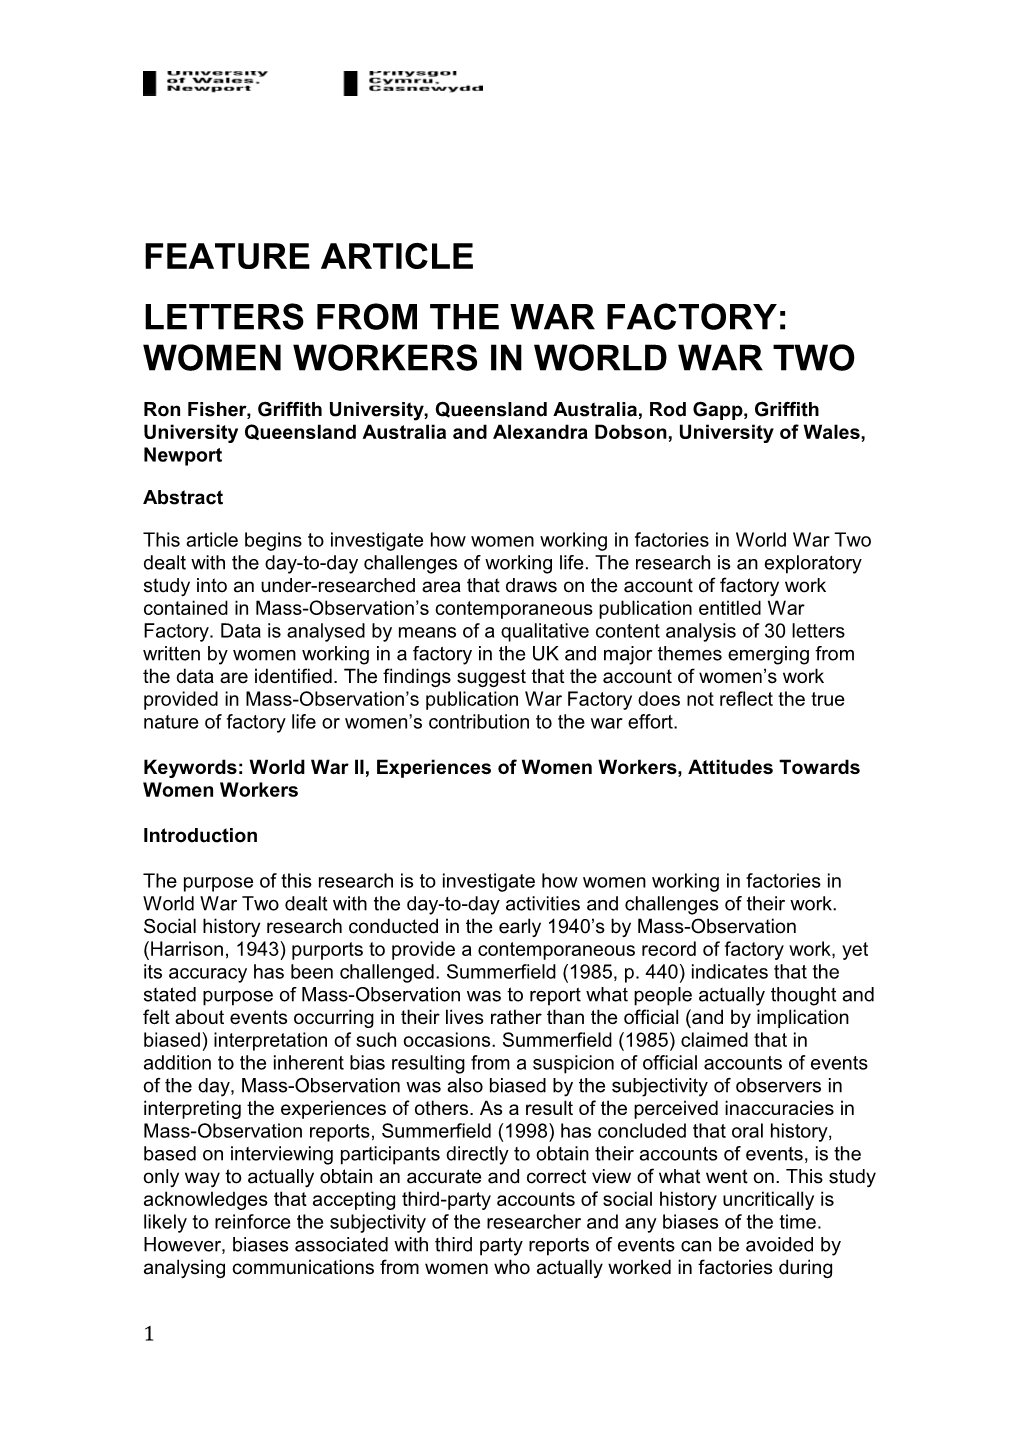 Letters from the War Factory: Women Workers in World War Two